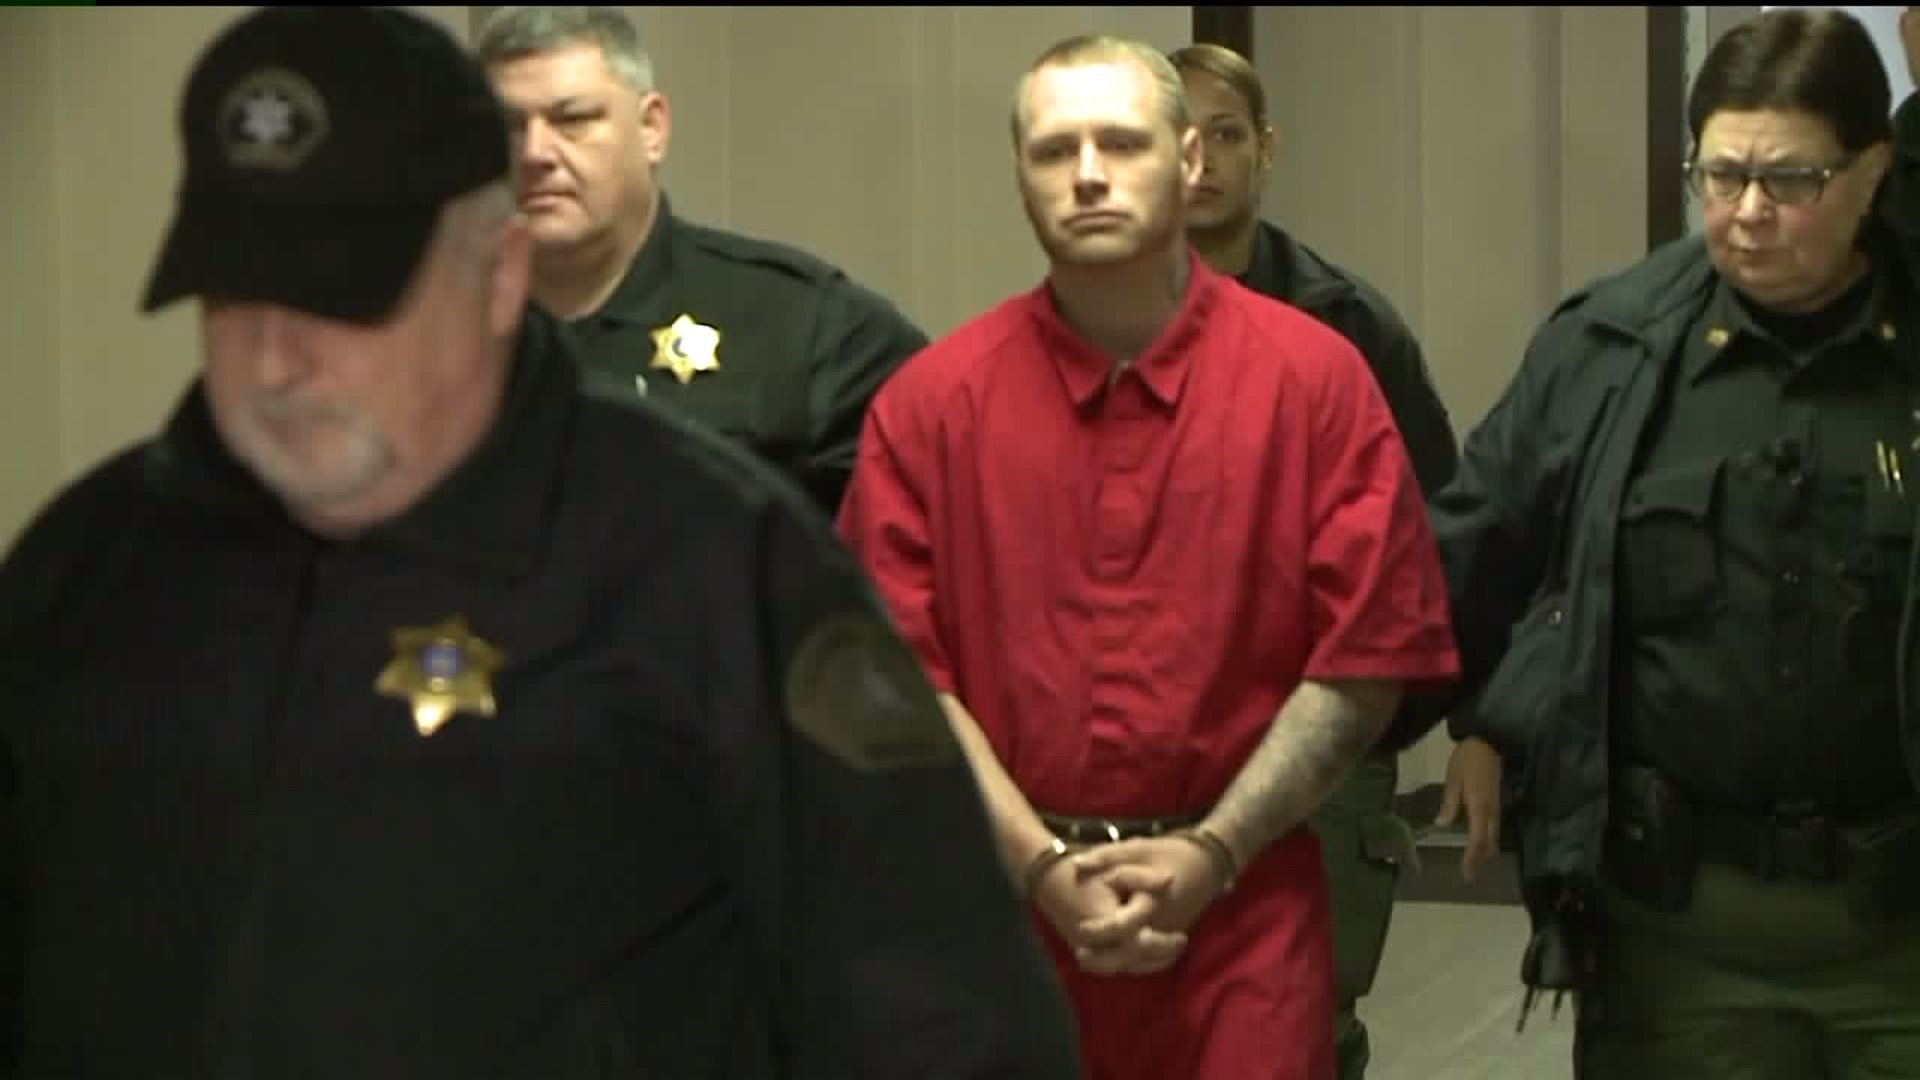 Walmart Parking Lot Shooter Gets More Than 100 Years in Prison, Morbid Tattoo Revealed